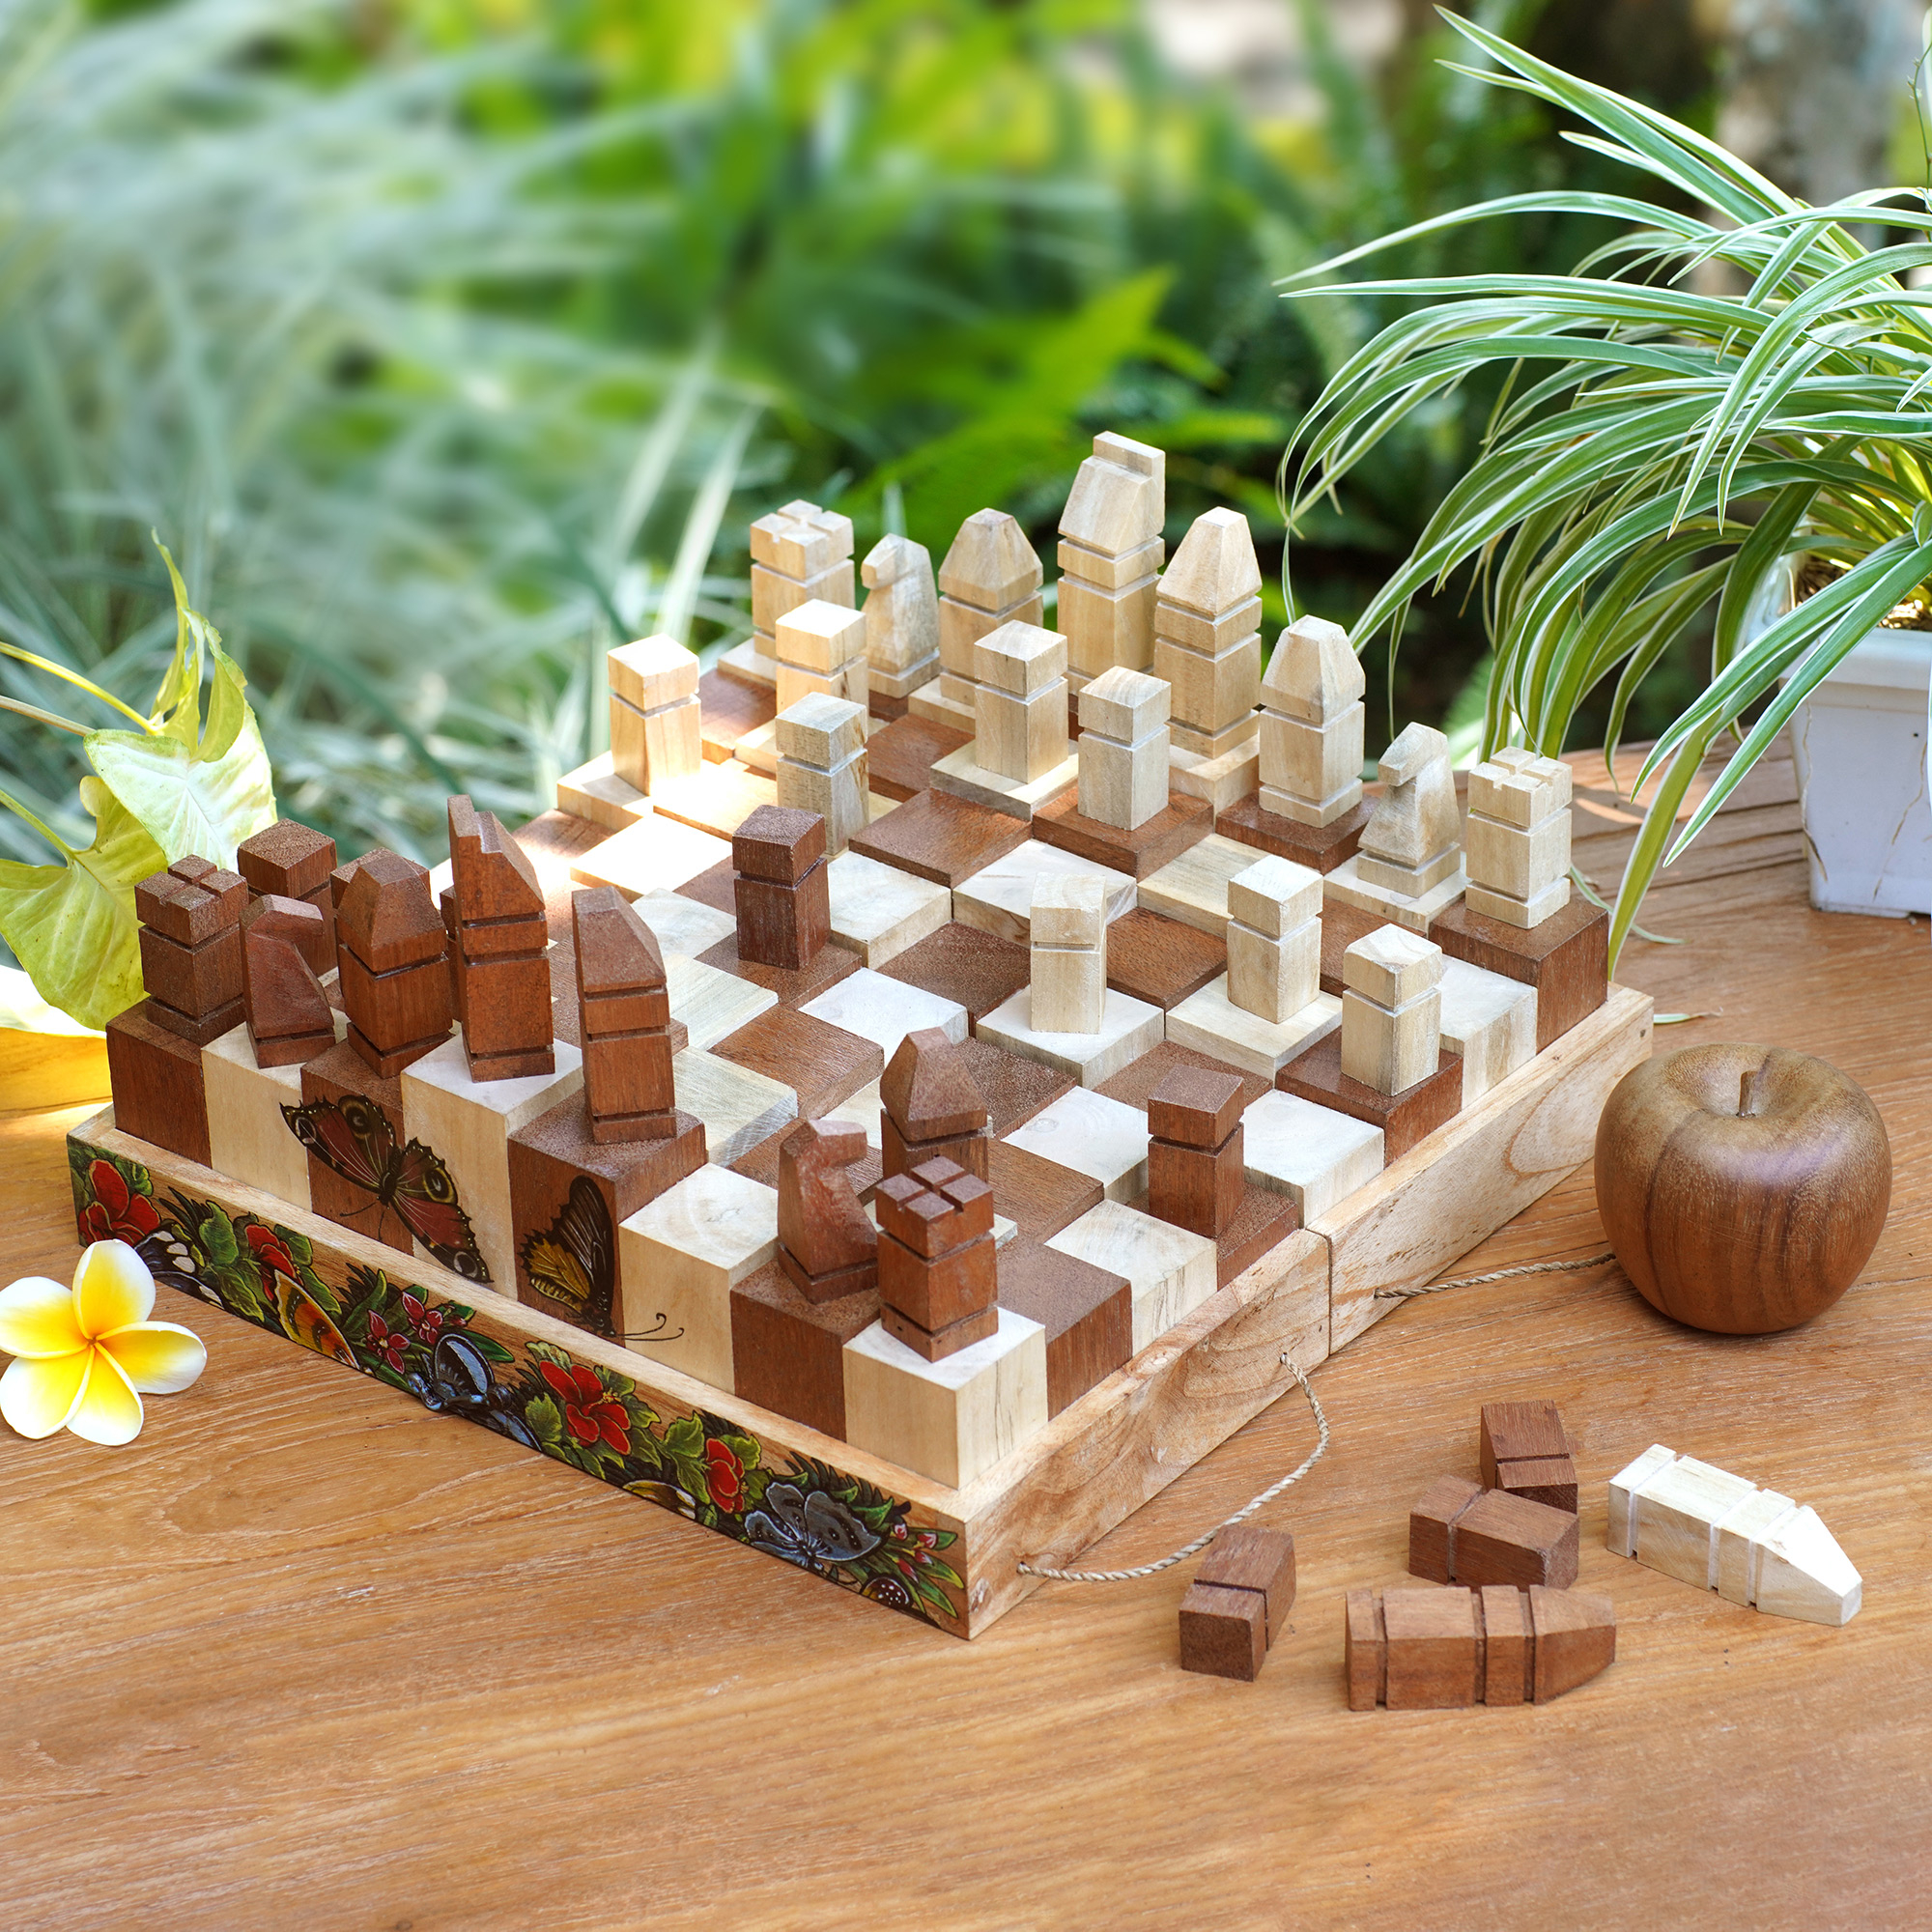 Chess set, Forest vs Flowers chess, themed chess set, botanical chess,  nature gifts, unique chess, chess set puzzle board, encasing nature